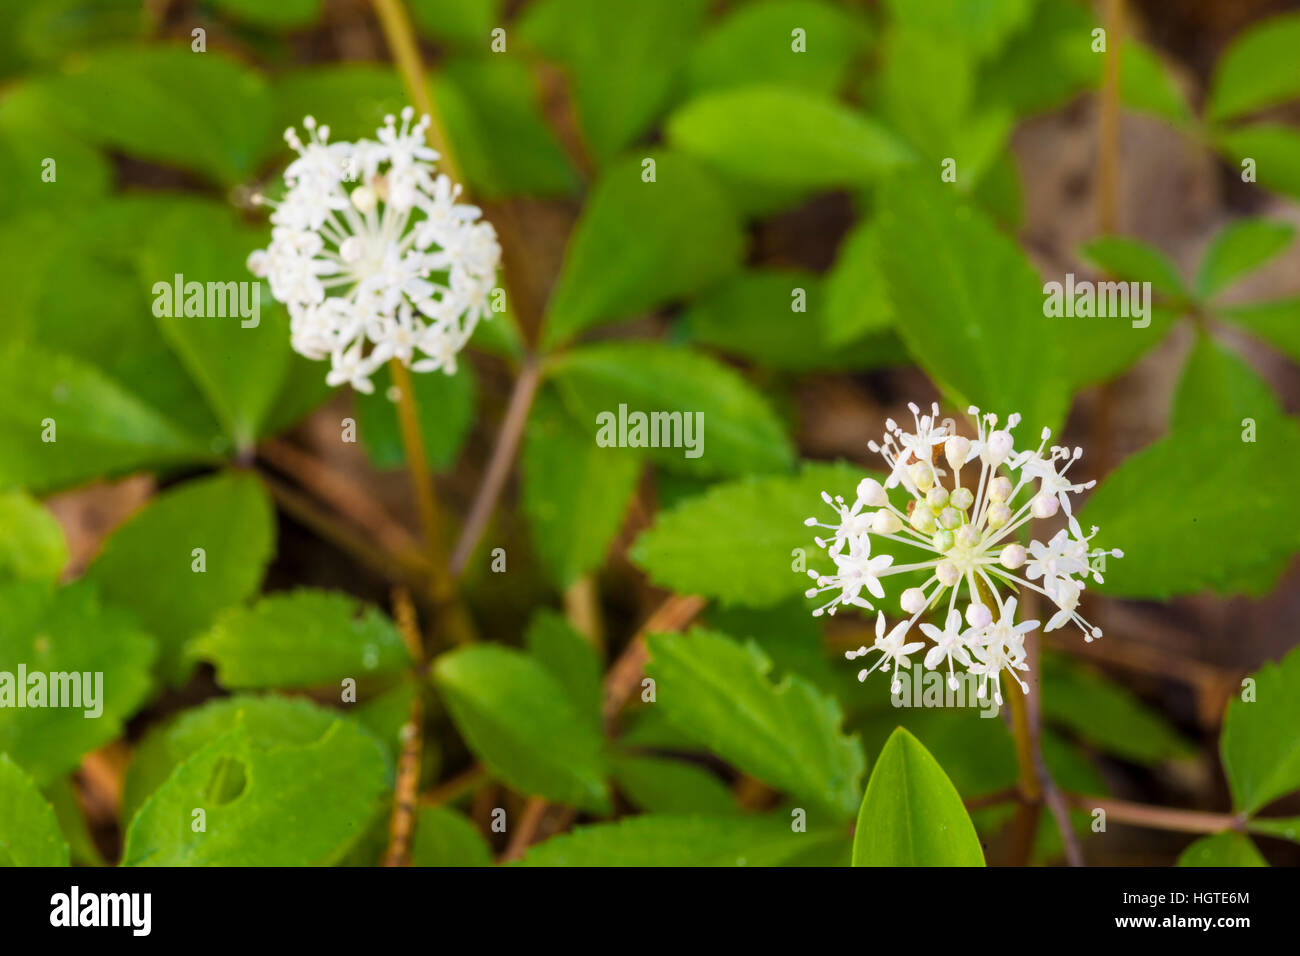 Dwarf ginseng, Panax trifolius, in a Durham, New Hampshire forest. Stock Photo